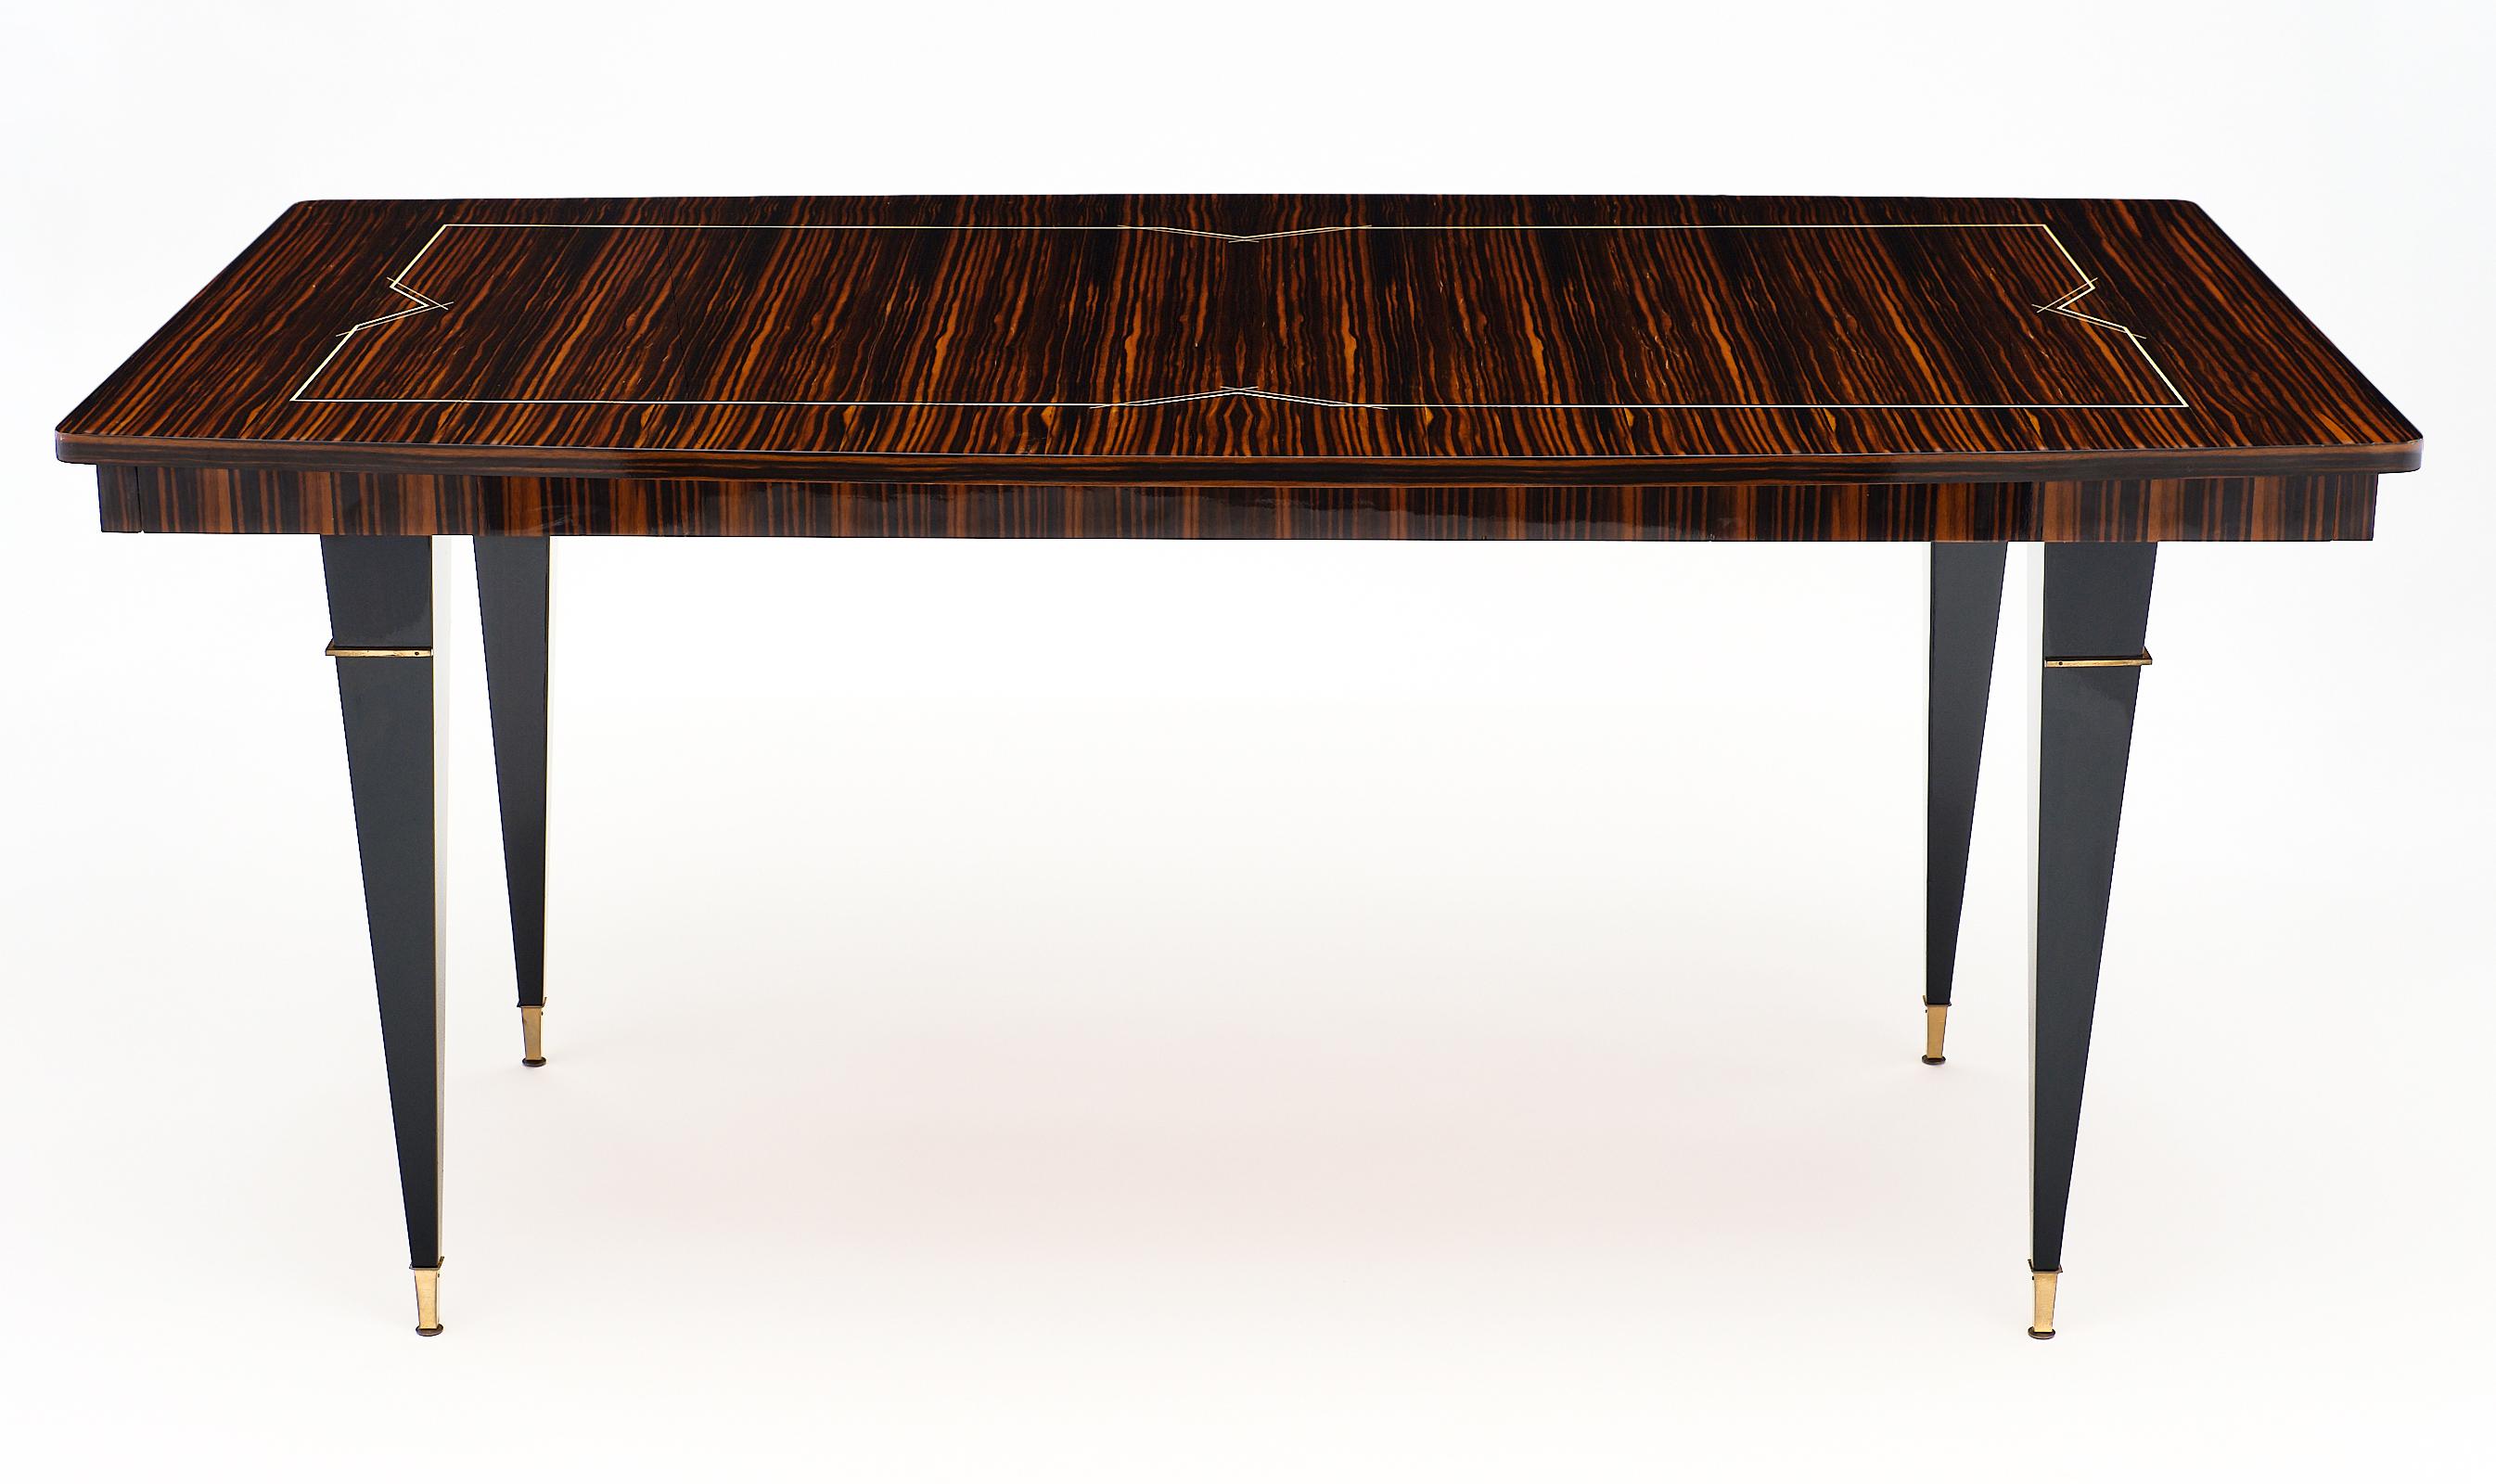 Macassar midcentury dining table from Lyon, France. This piece has a beautiful inlay and lovely tapered legs. We love the exotic wood and strong presence of this piece.